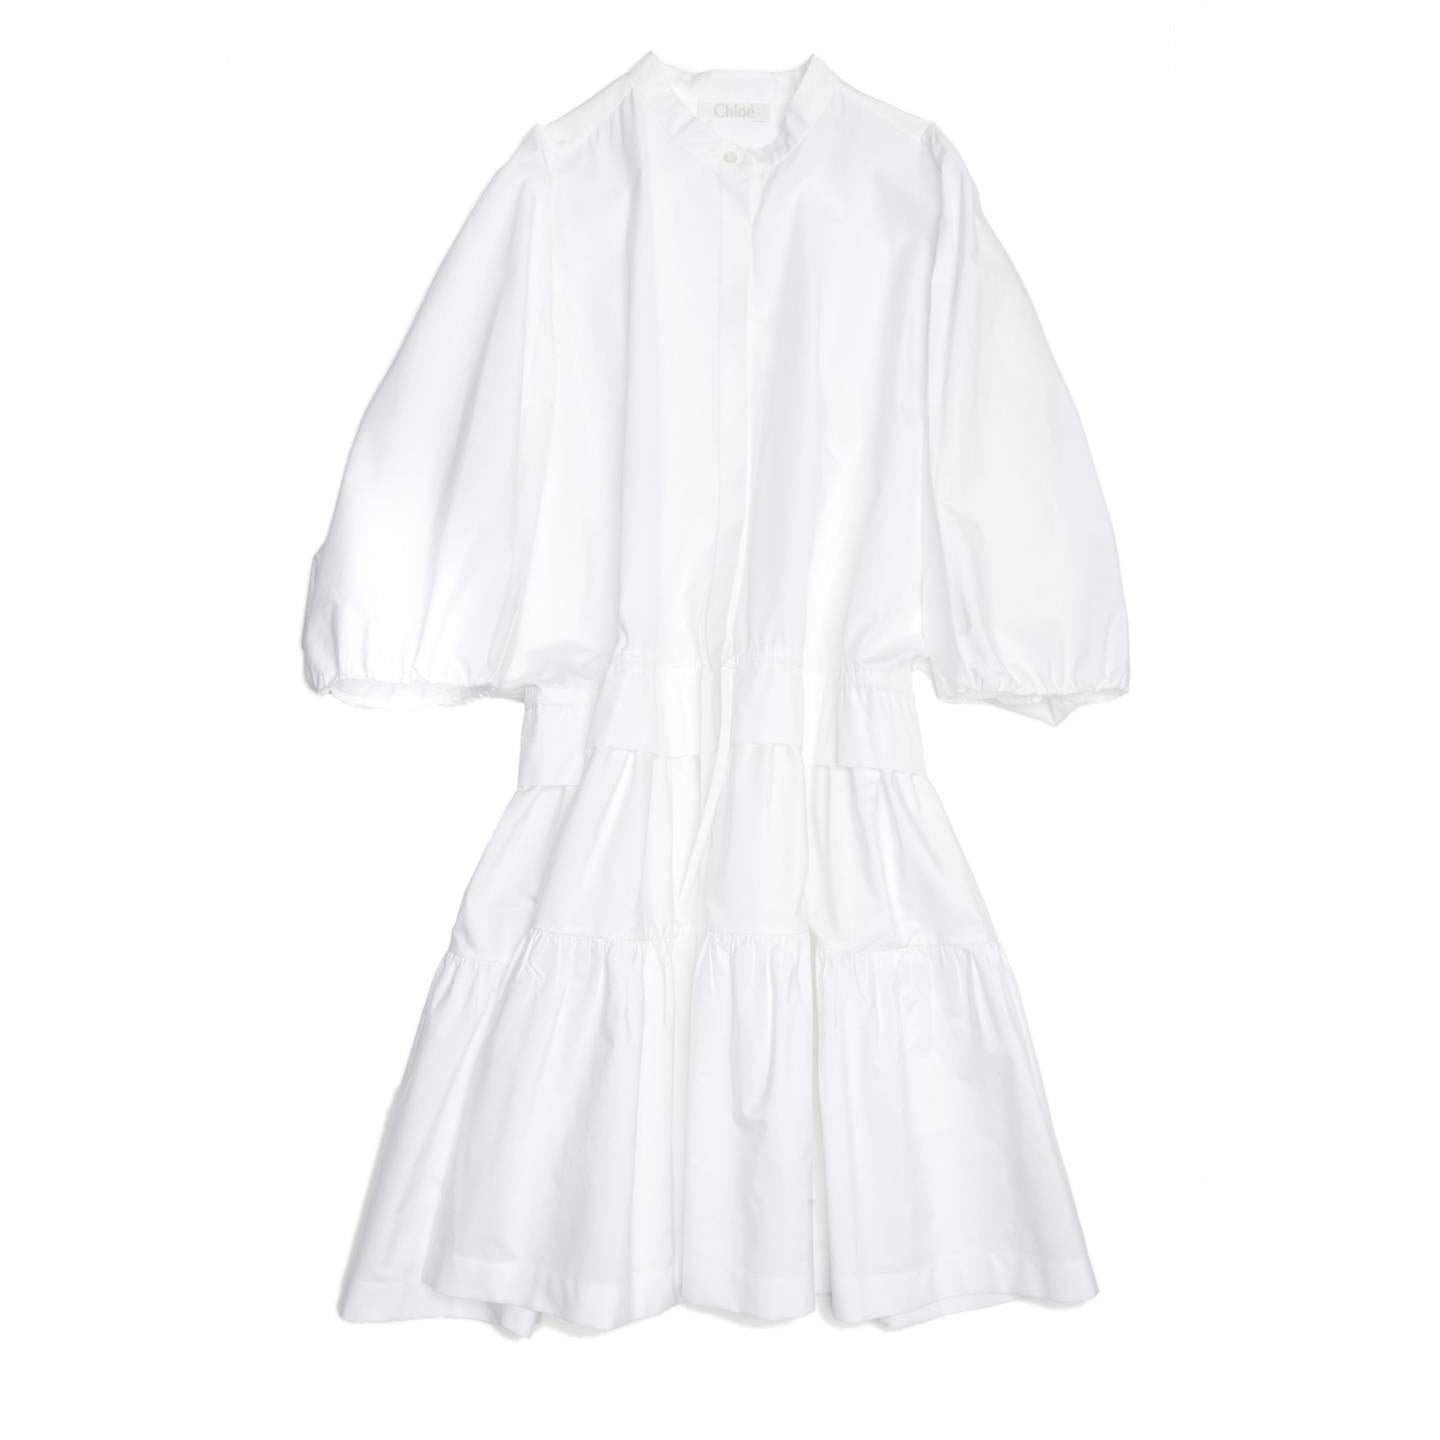 White cotton dress with Nehru neck, batwing sleeves and tiered layers. The top part fastens at front like a shirt and the buttons are covered by a flap, a drawstring regulate the waist line and back side seams create gathers on the sleeves. A deep